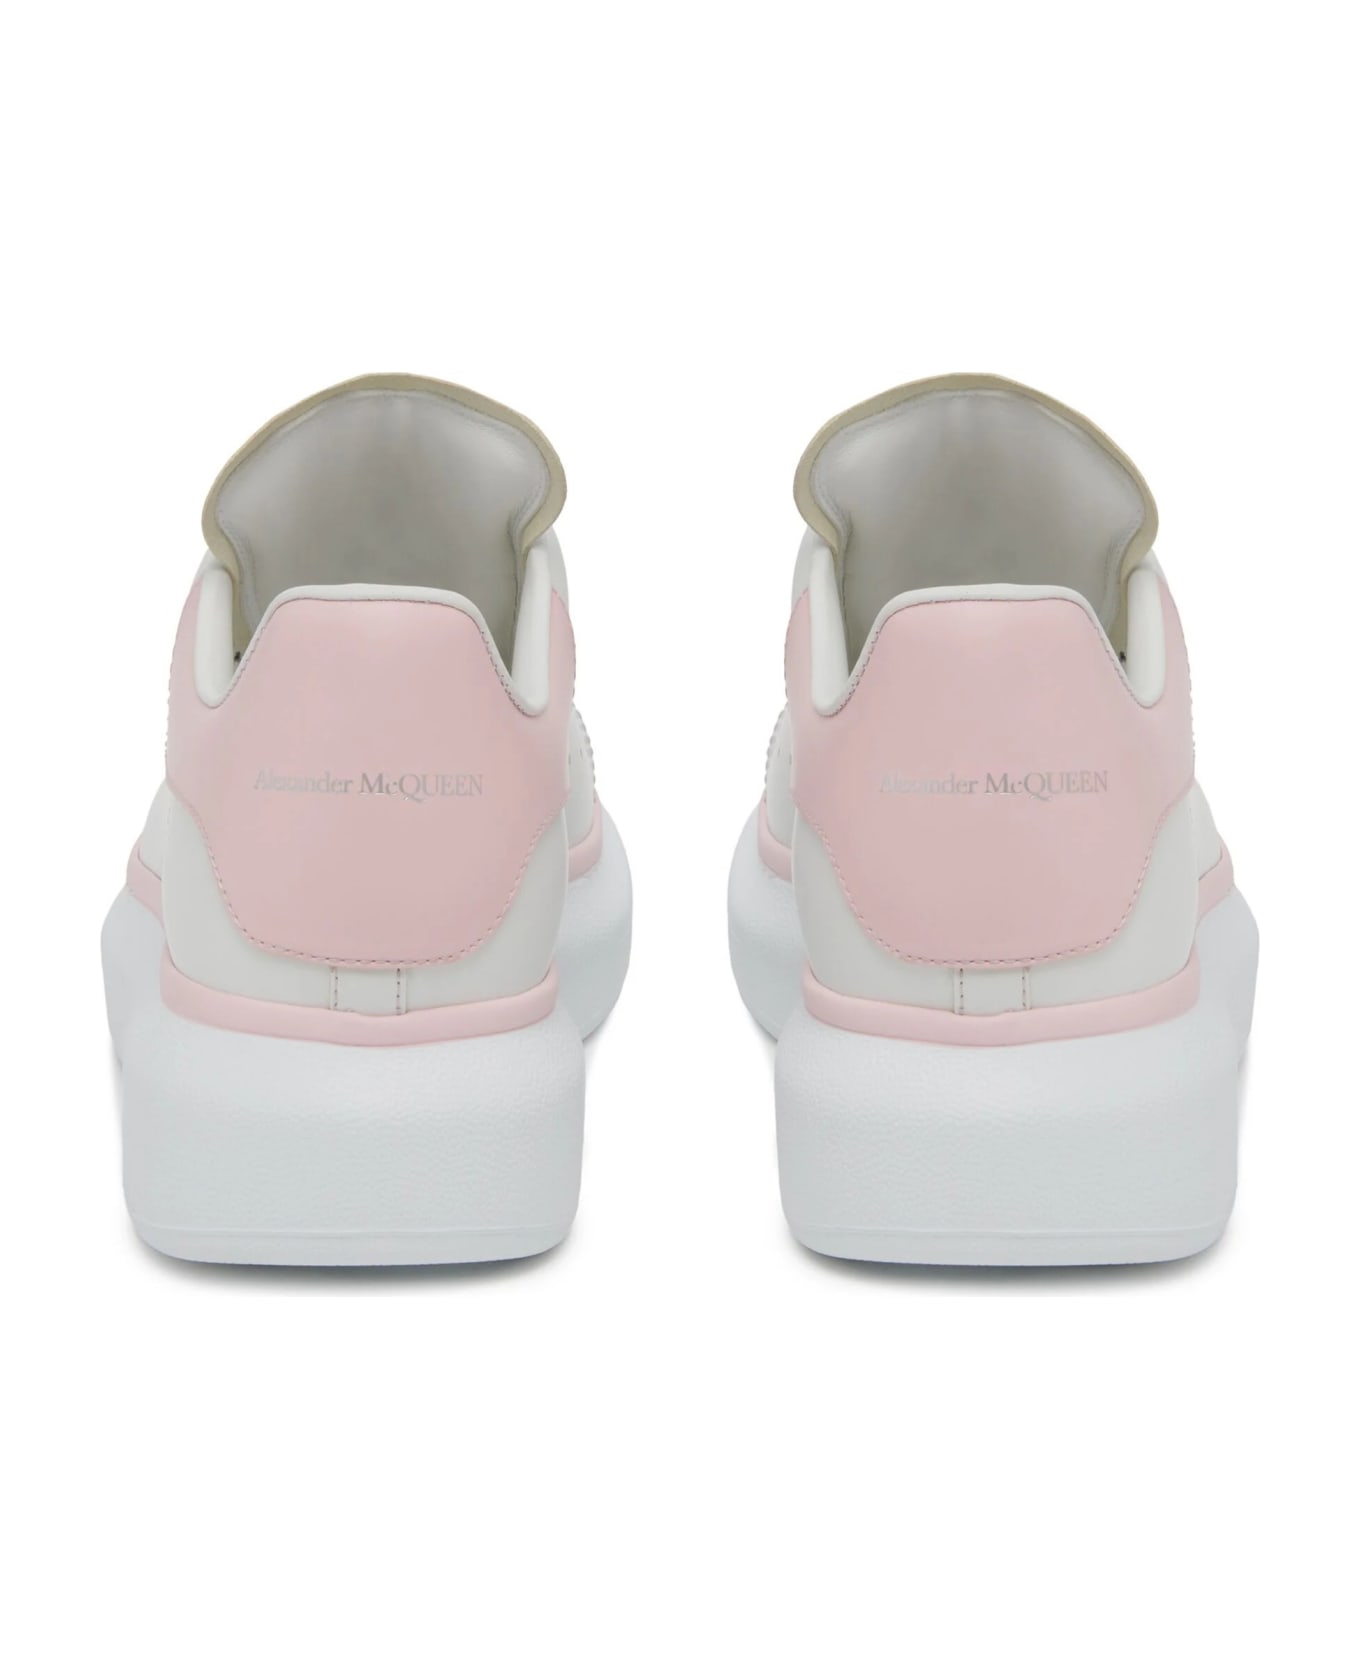 Alexander McQueen White Oversized Sneakers With Powder Pink Details - White スニーカー